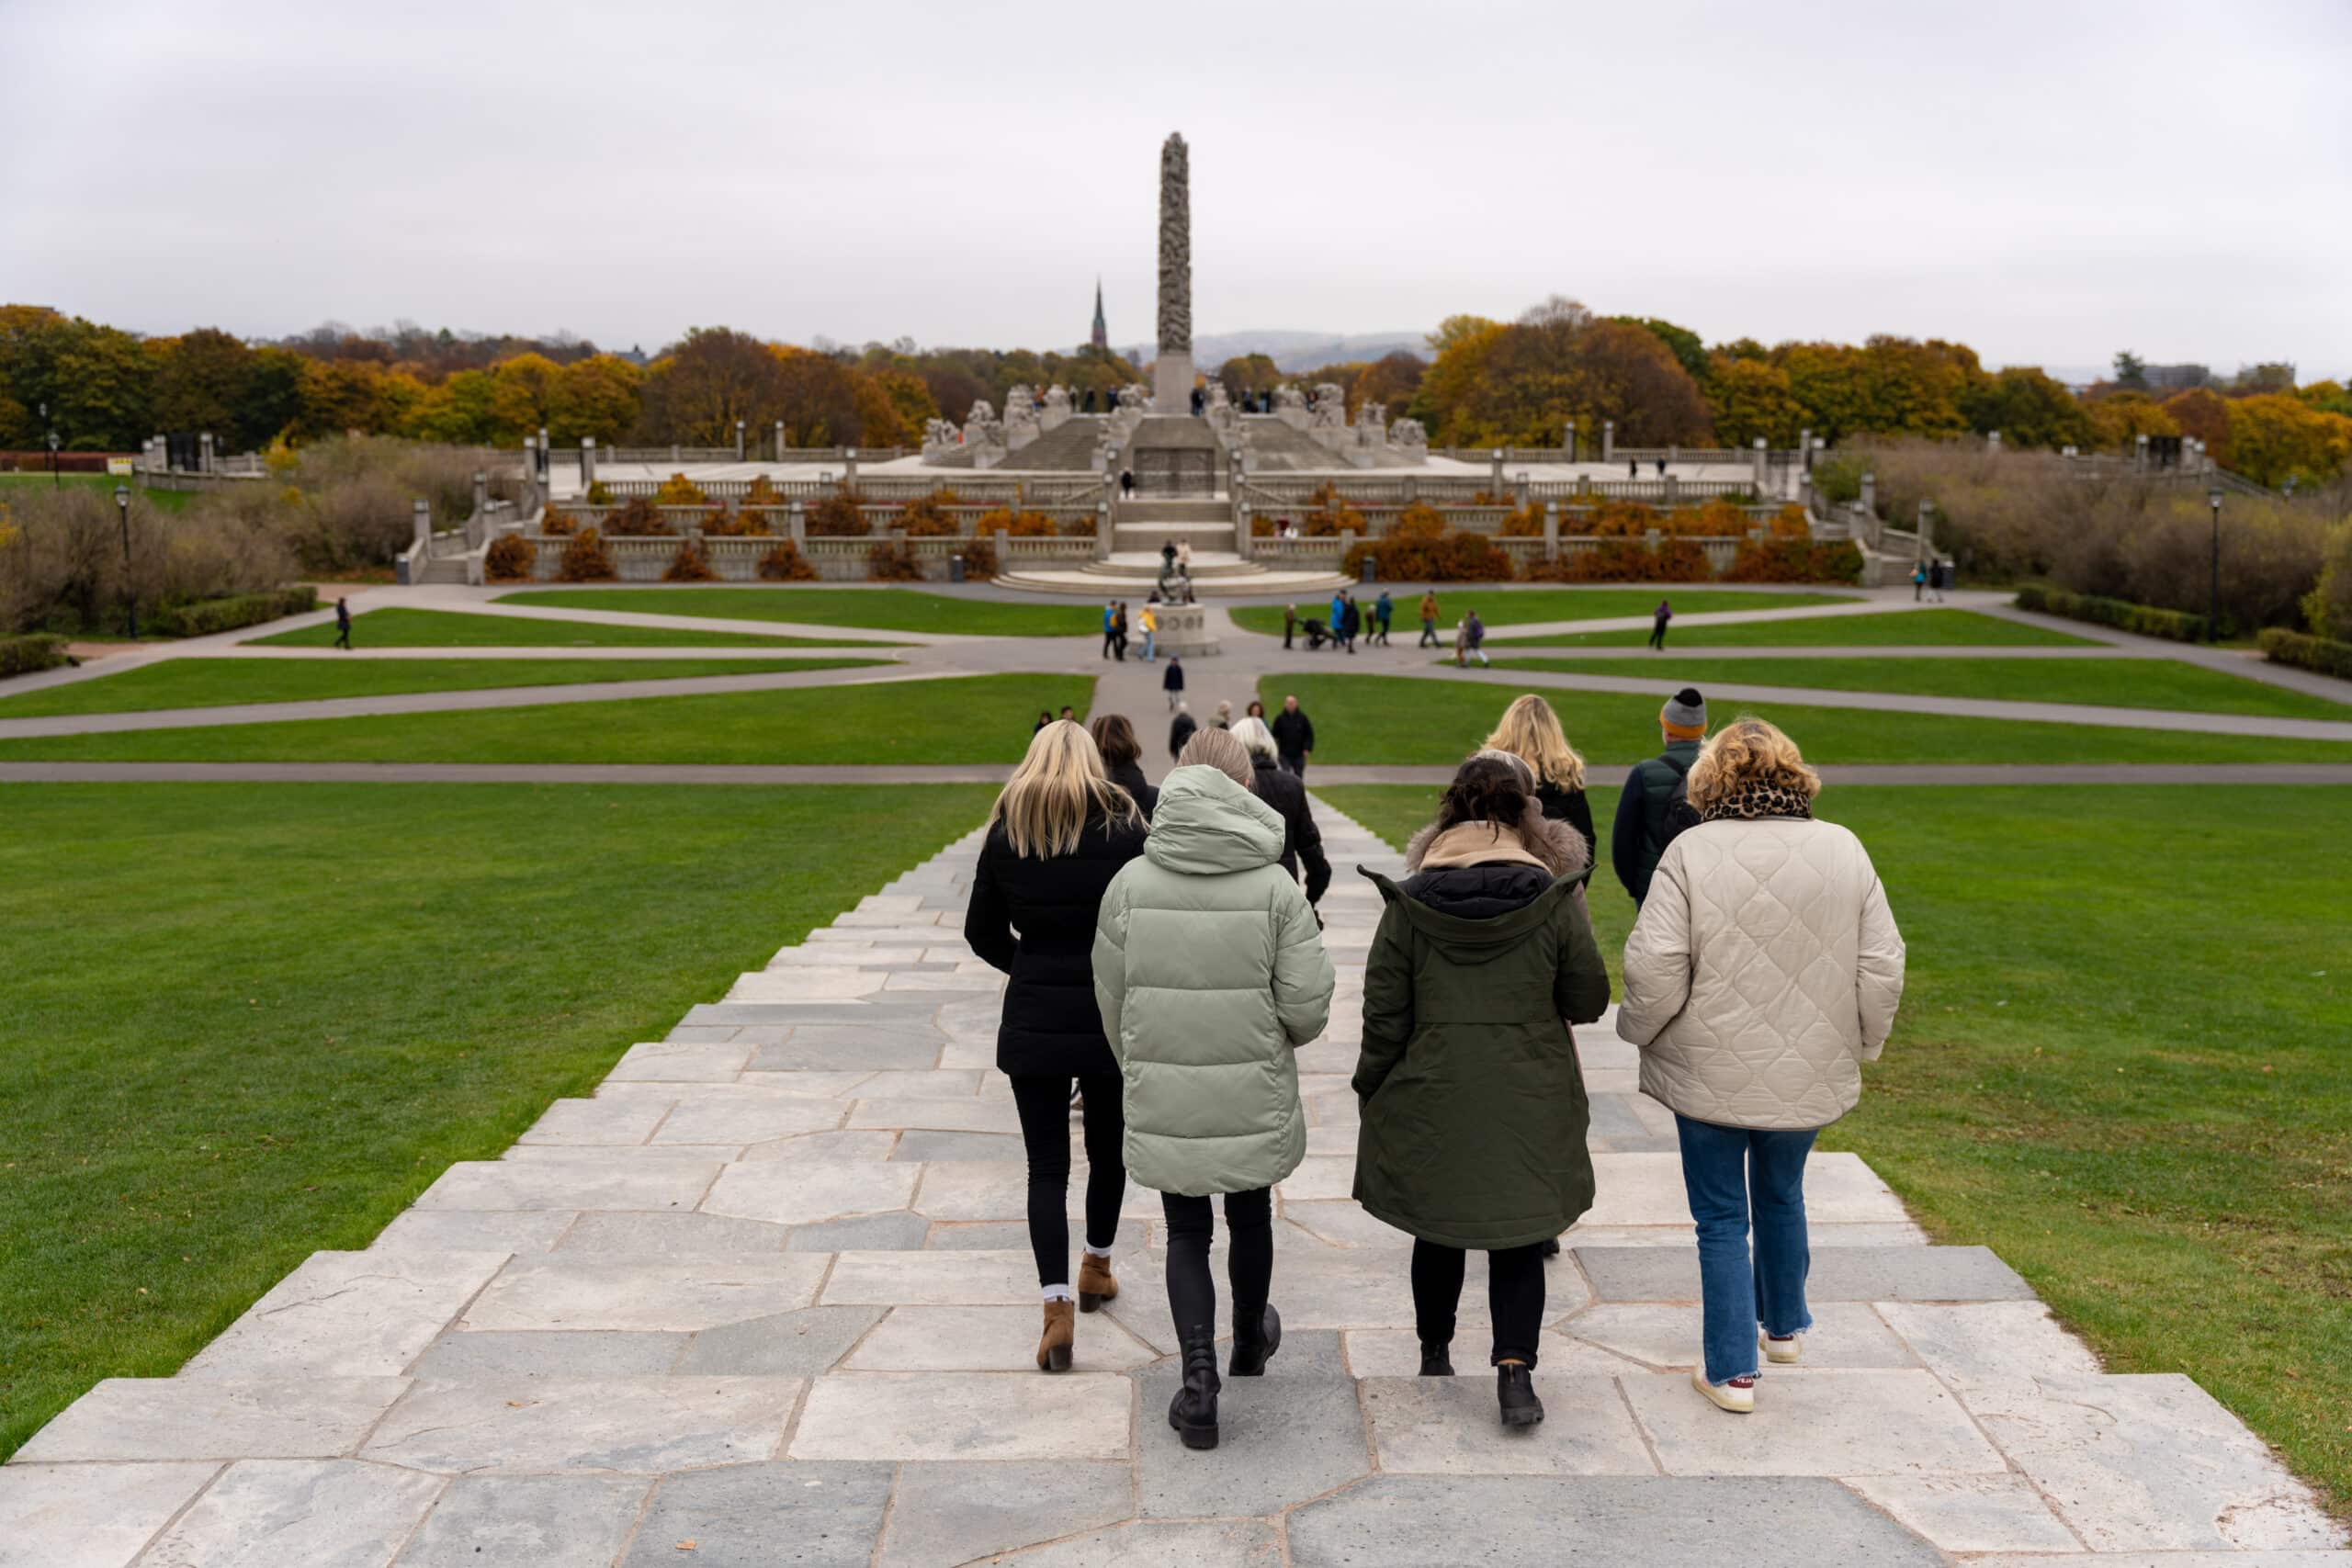 Group of people going towards the Monolith in the Vigeland Park